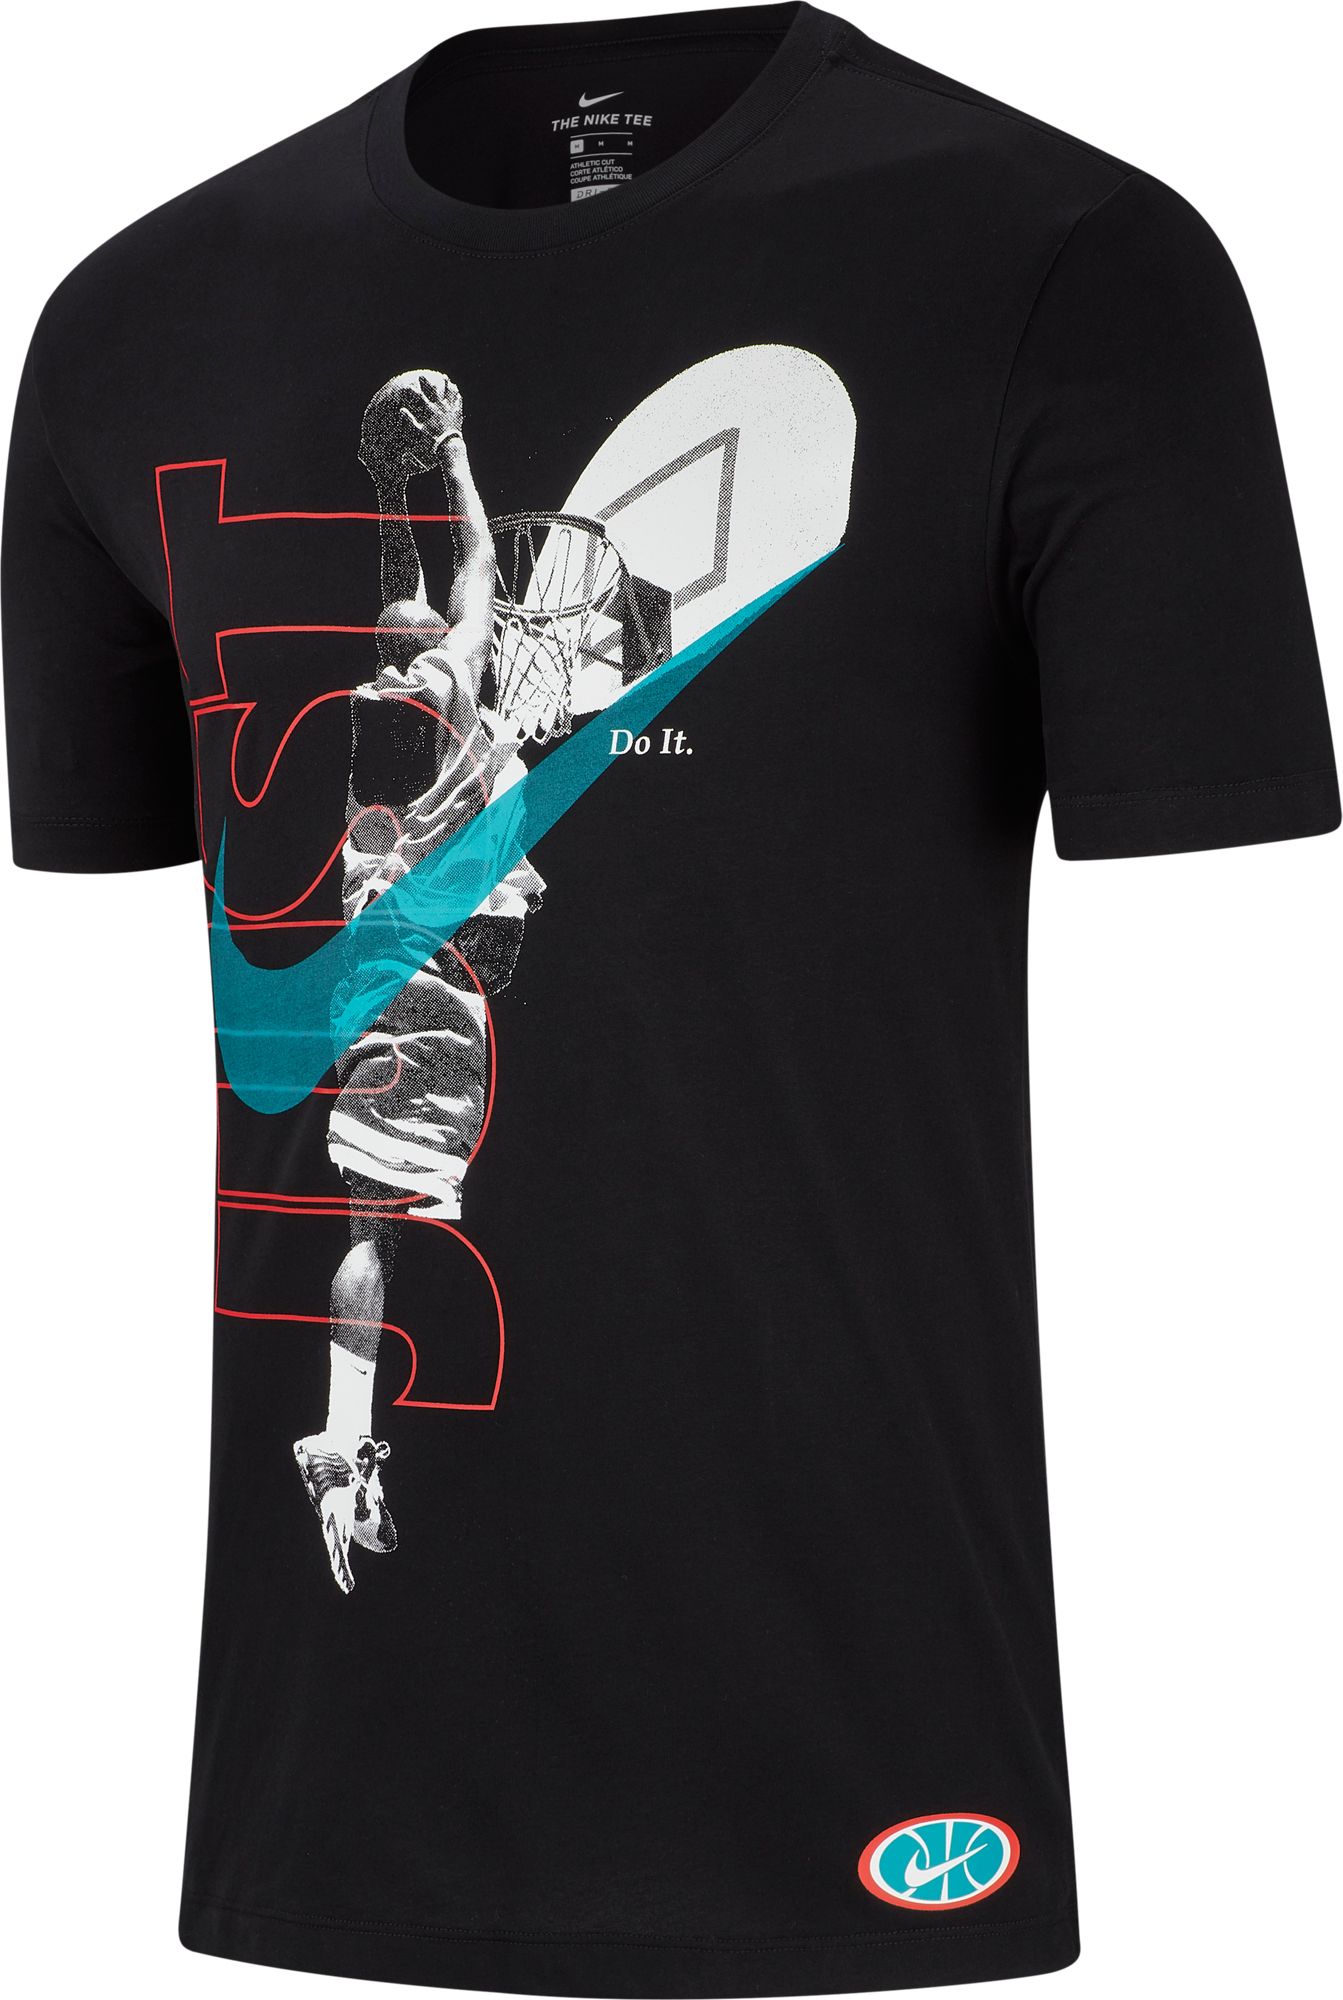 Nike Men's Dry Just Dunk Graphic Tee - .97